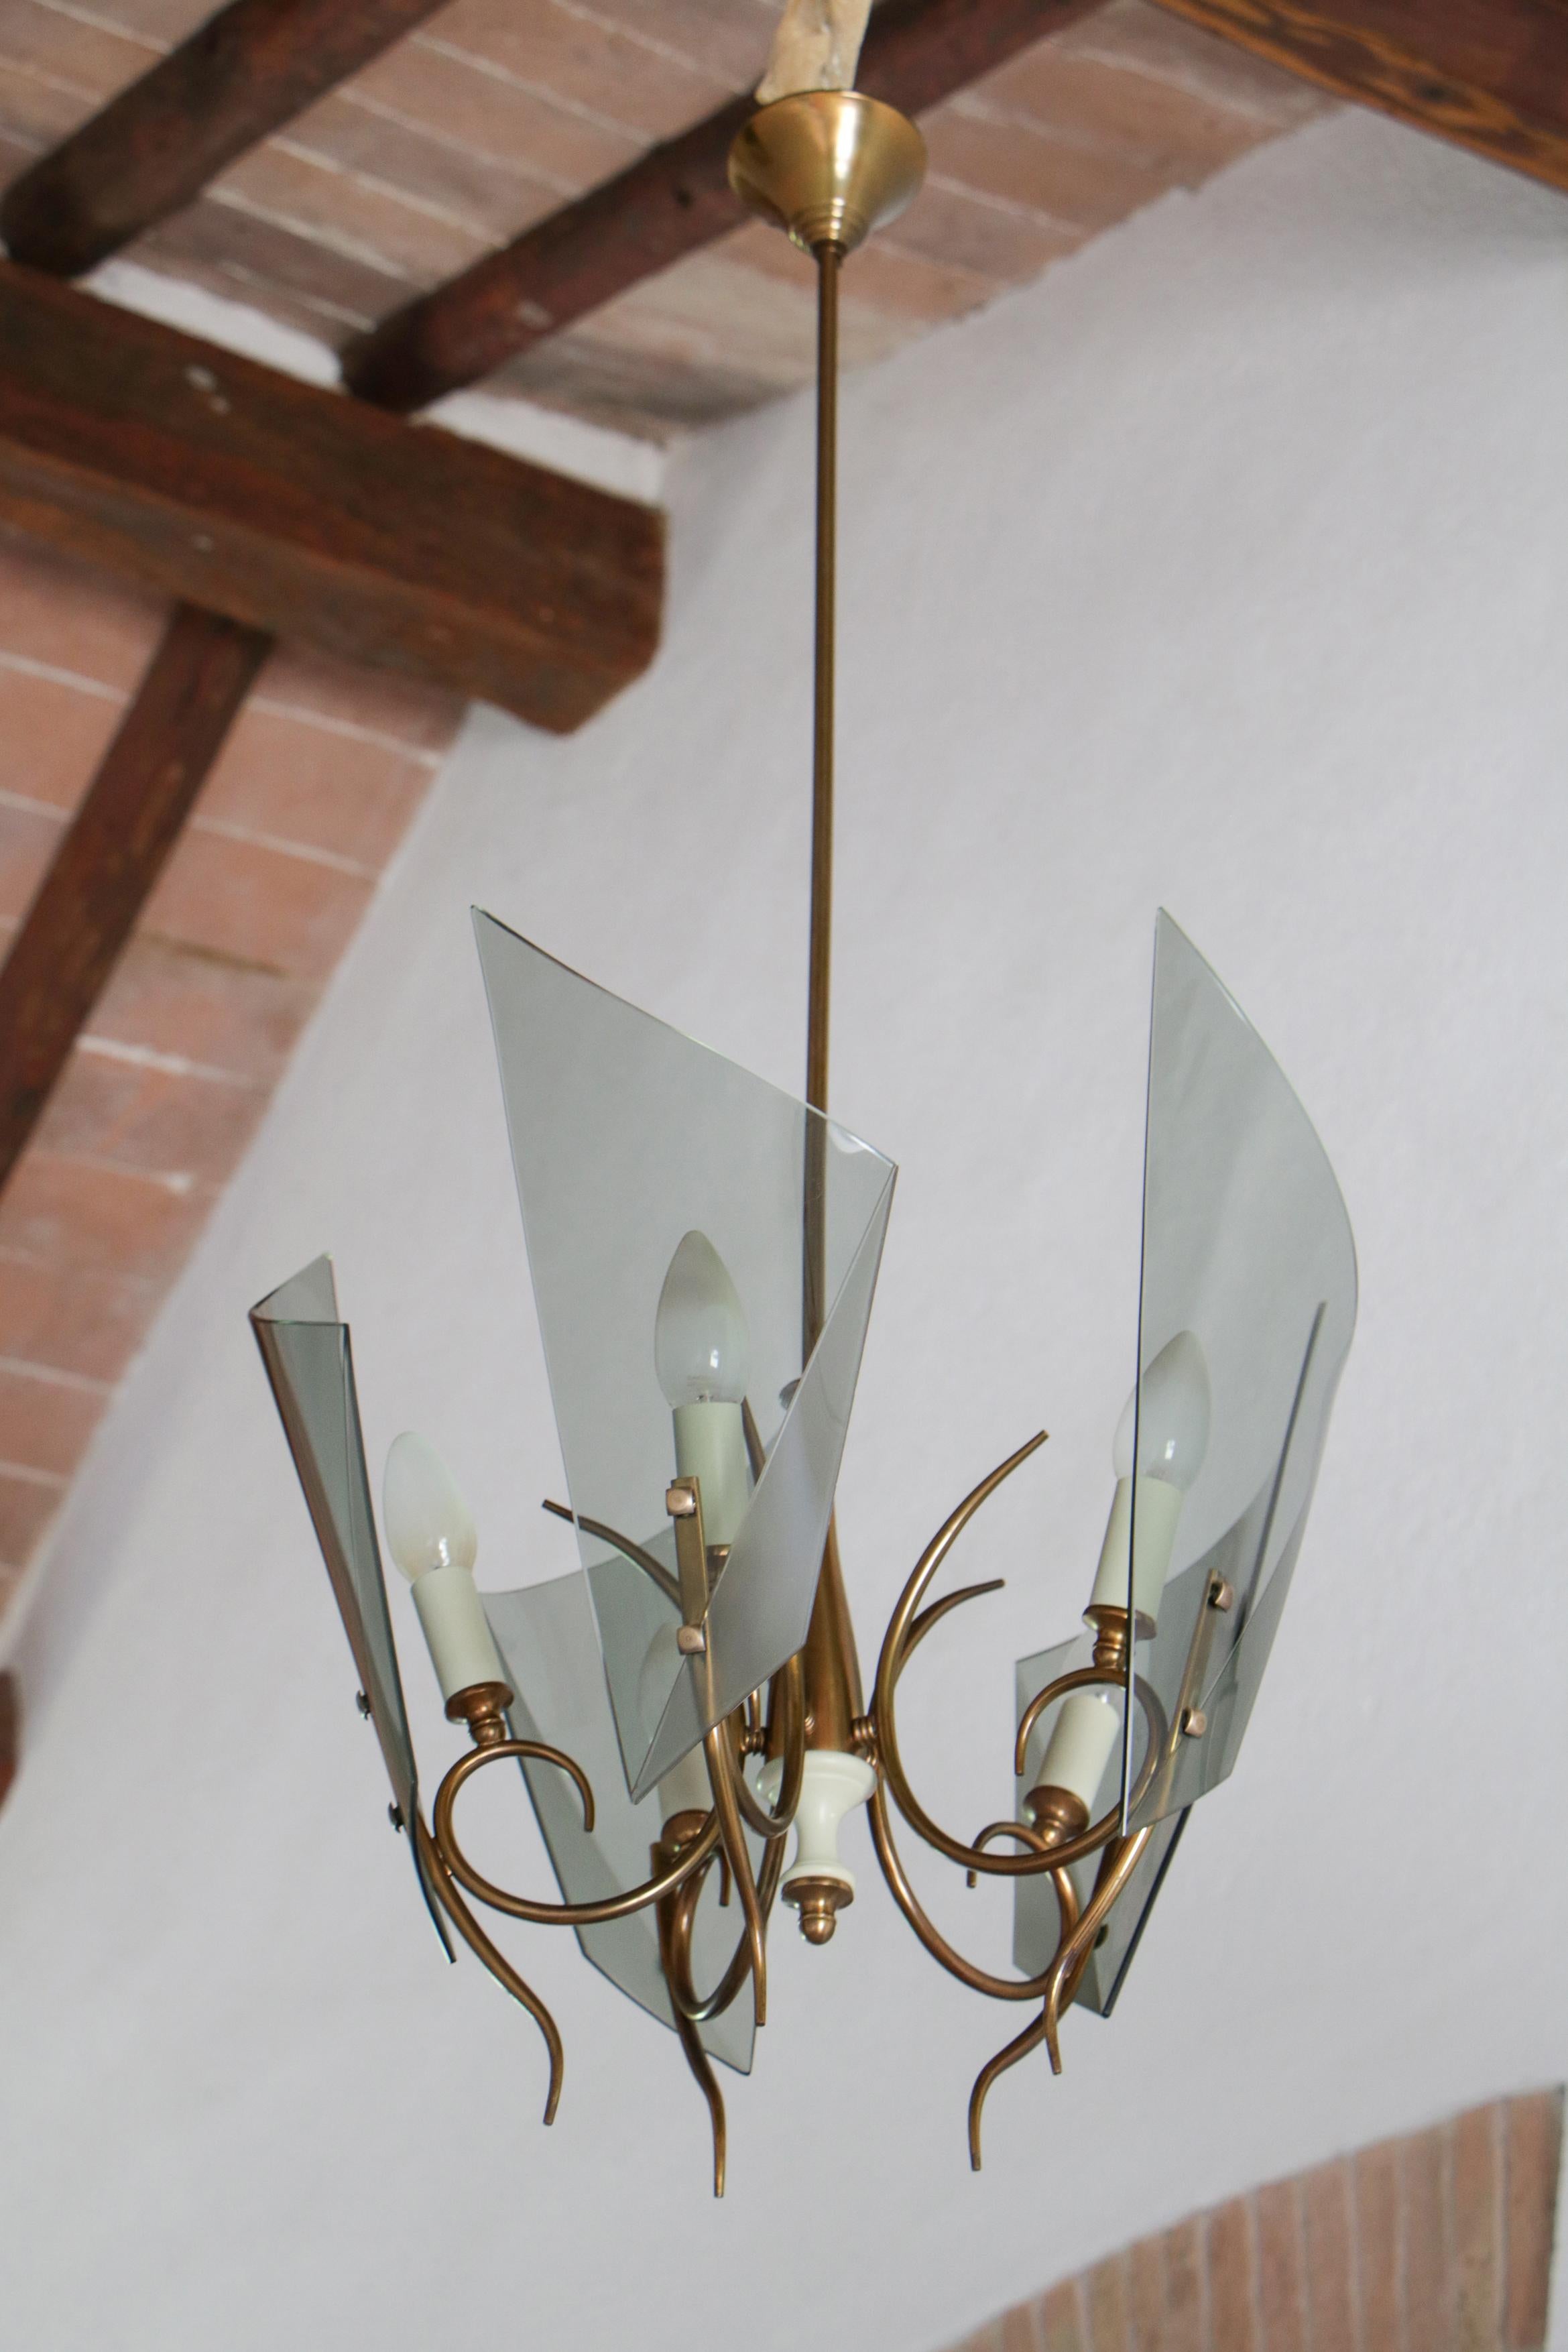 Brass Italian Mid-Century Curved Glass Chandelier Attributed to Fontana Arte, 1950s For Sale